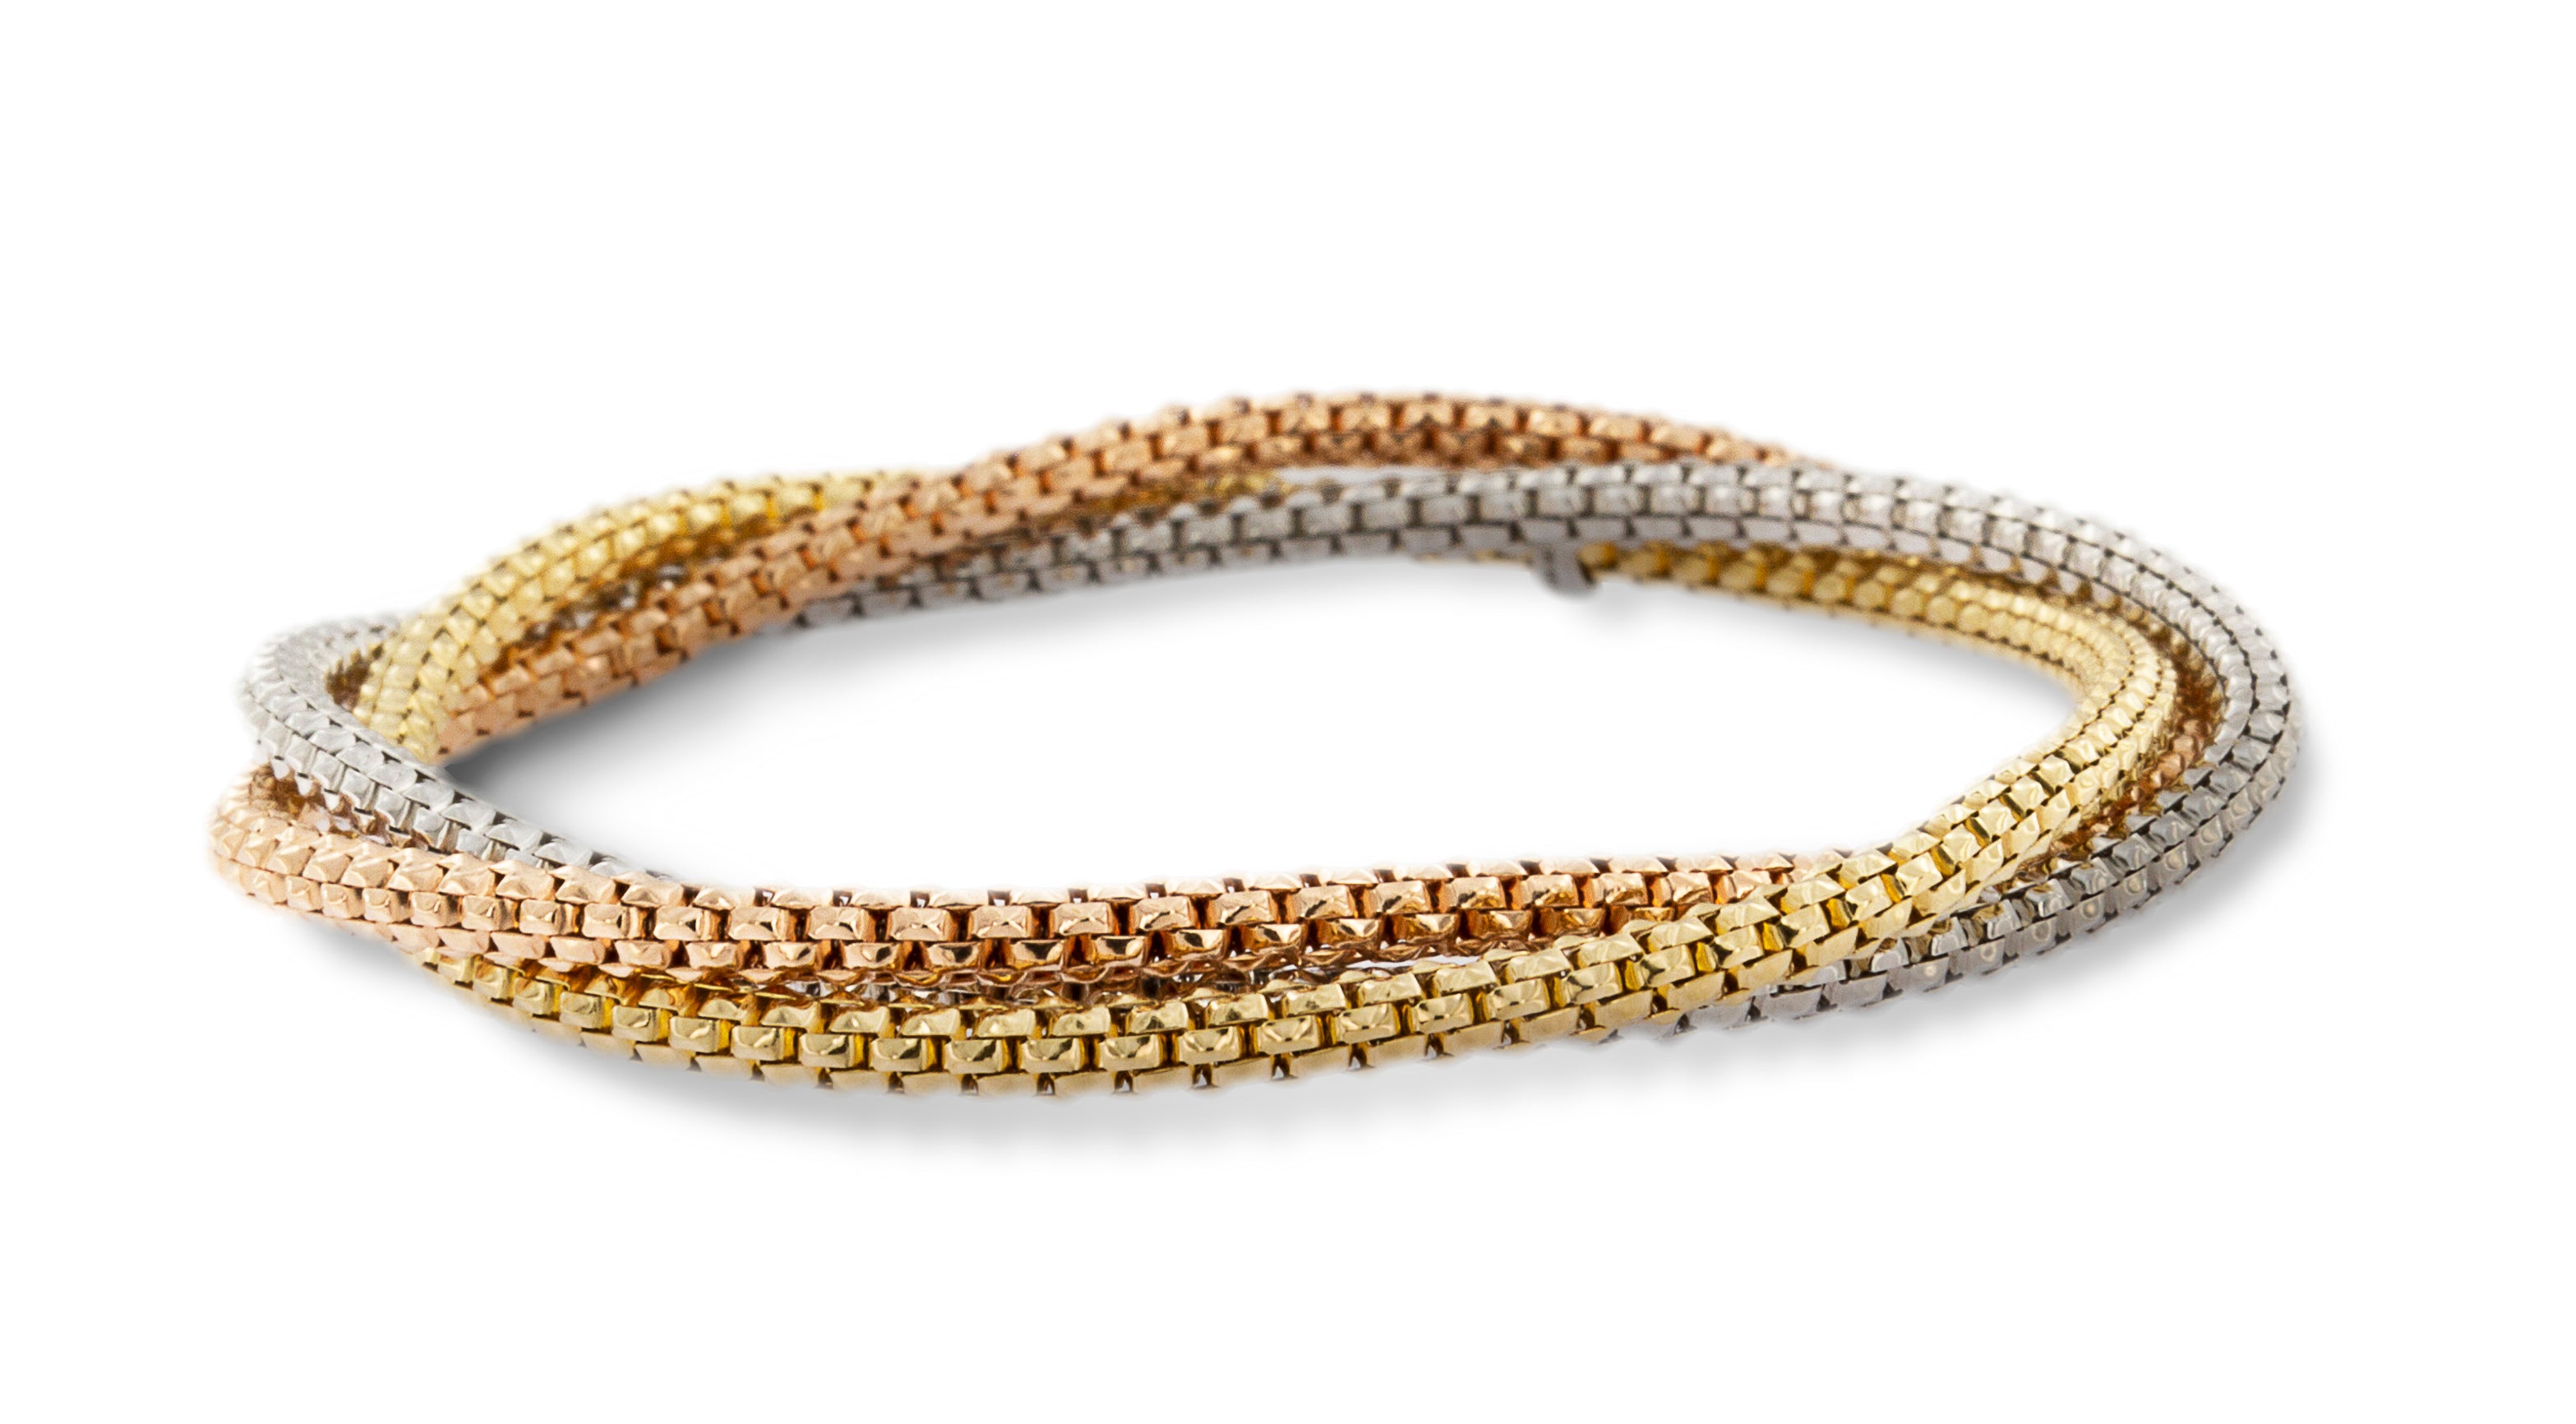 Indulge in luxury with the 18k Italian Gold Bracelet from our Stella Millano Italian Jewelry collection. Crafted with 18k Italian white, rose and yellow gold, this one size fits all stretchable and braided bracelet features 1 white gold solid rondels and a stylish mesh design. Elevate your look with our stunning Rockstar collection.